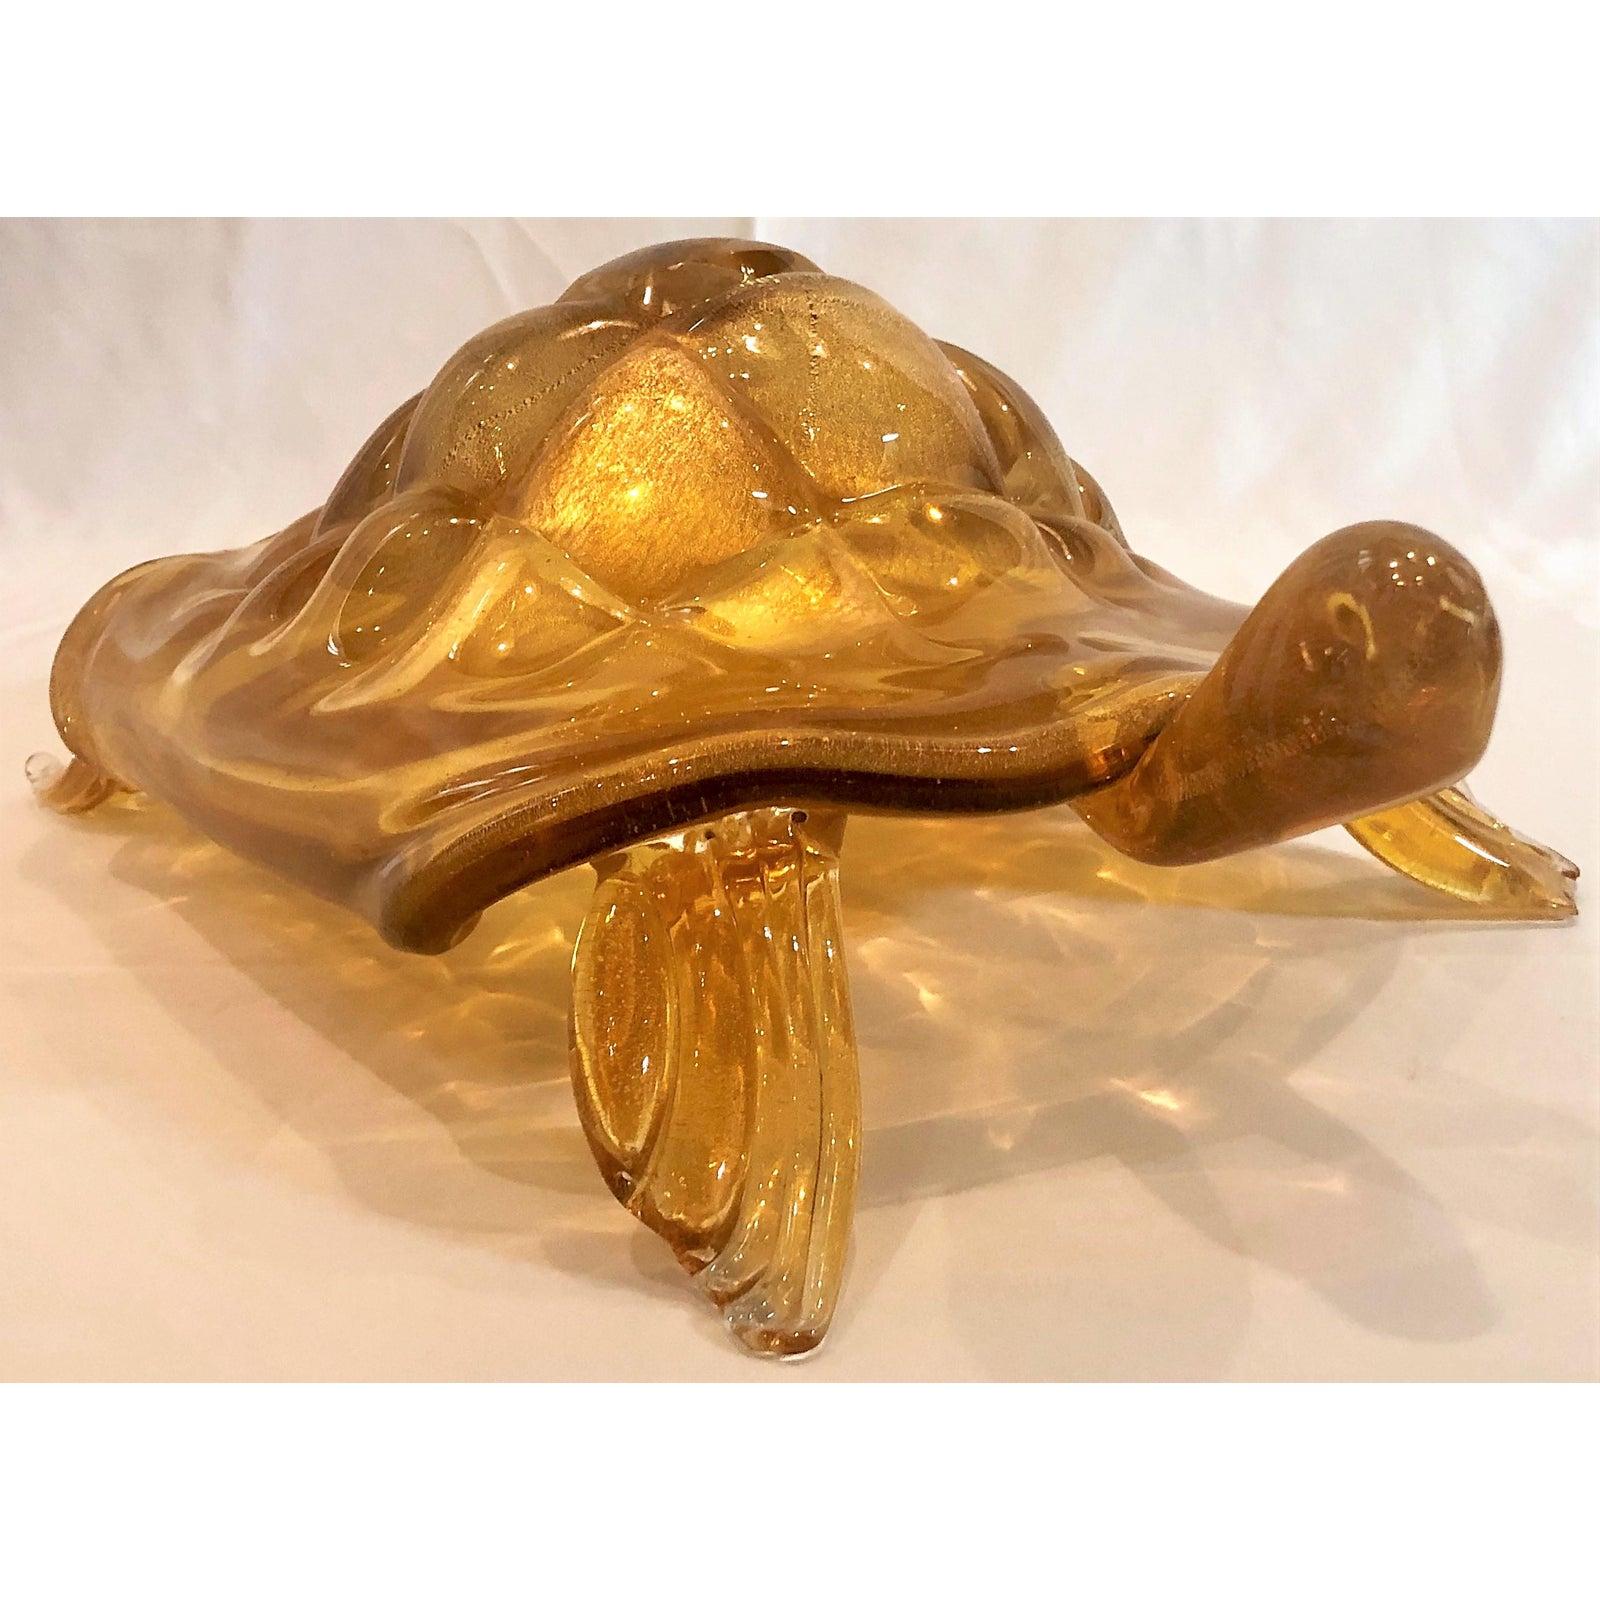 Estate Italian Murano glass turtle. This will make you and your guests smile with its whimsical expression and lovely color.